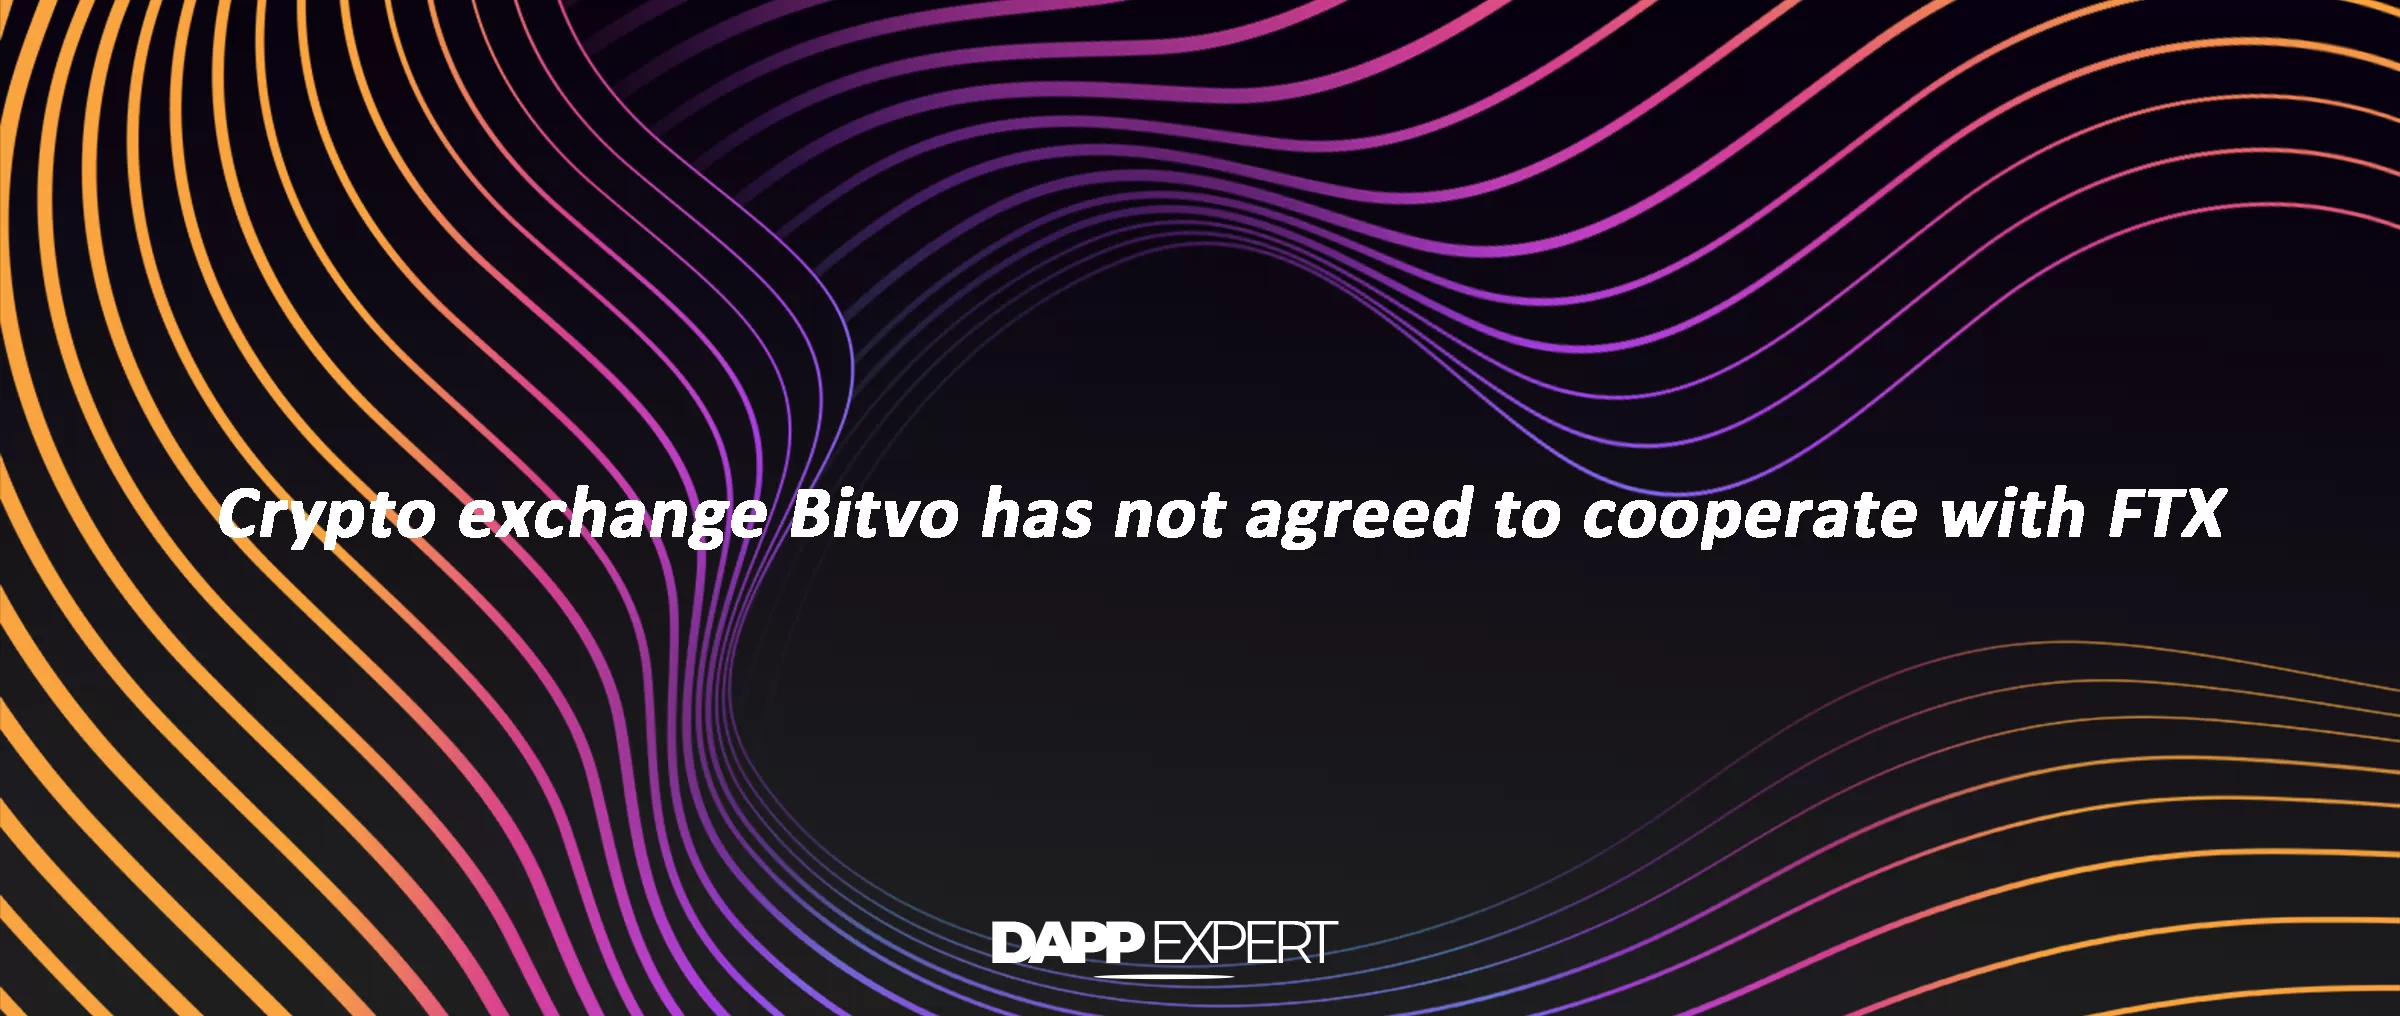 Crypto exchange Bitvo has not agreed to cooperate with FTX